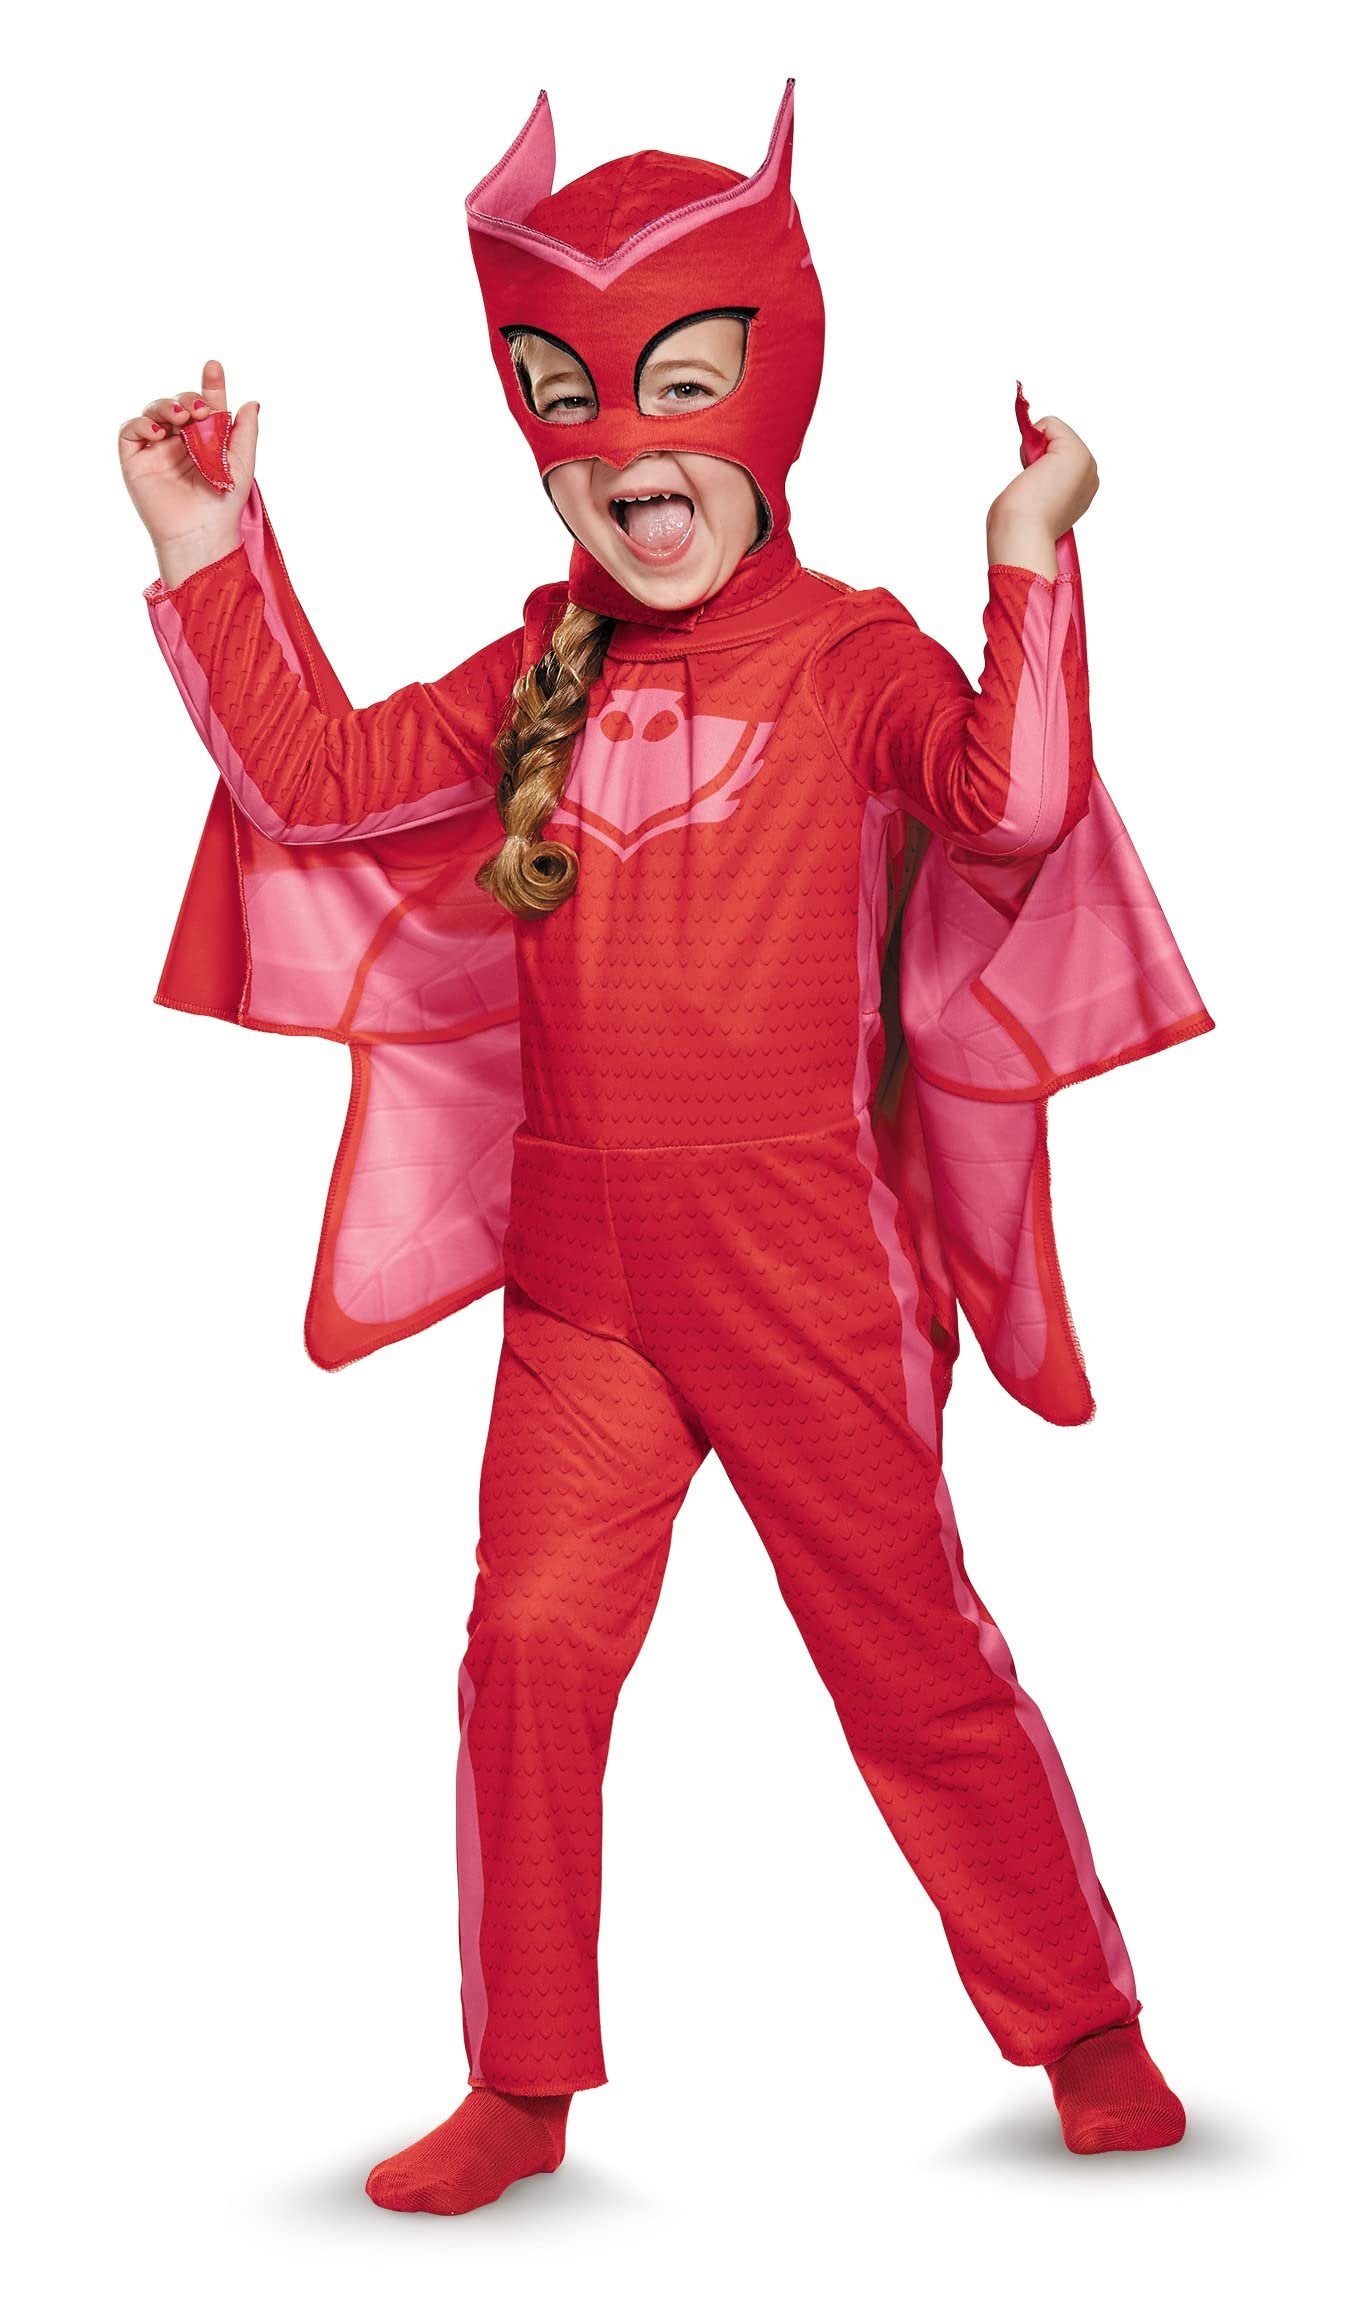 PJ Masks Owlette Classic Costume, Red, Large 4-6, Free Shipping & Returns